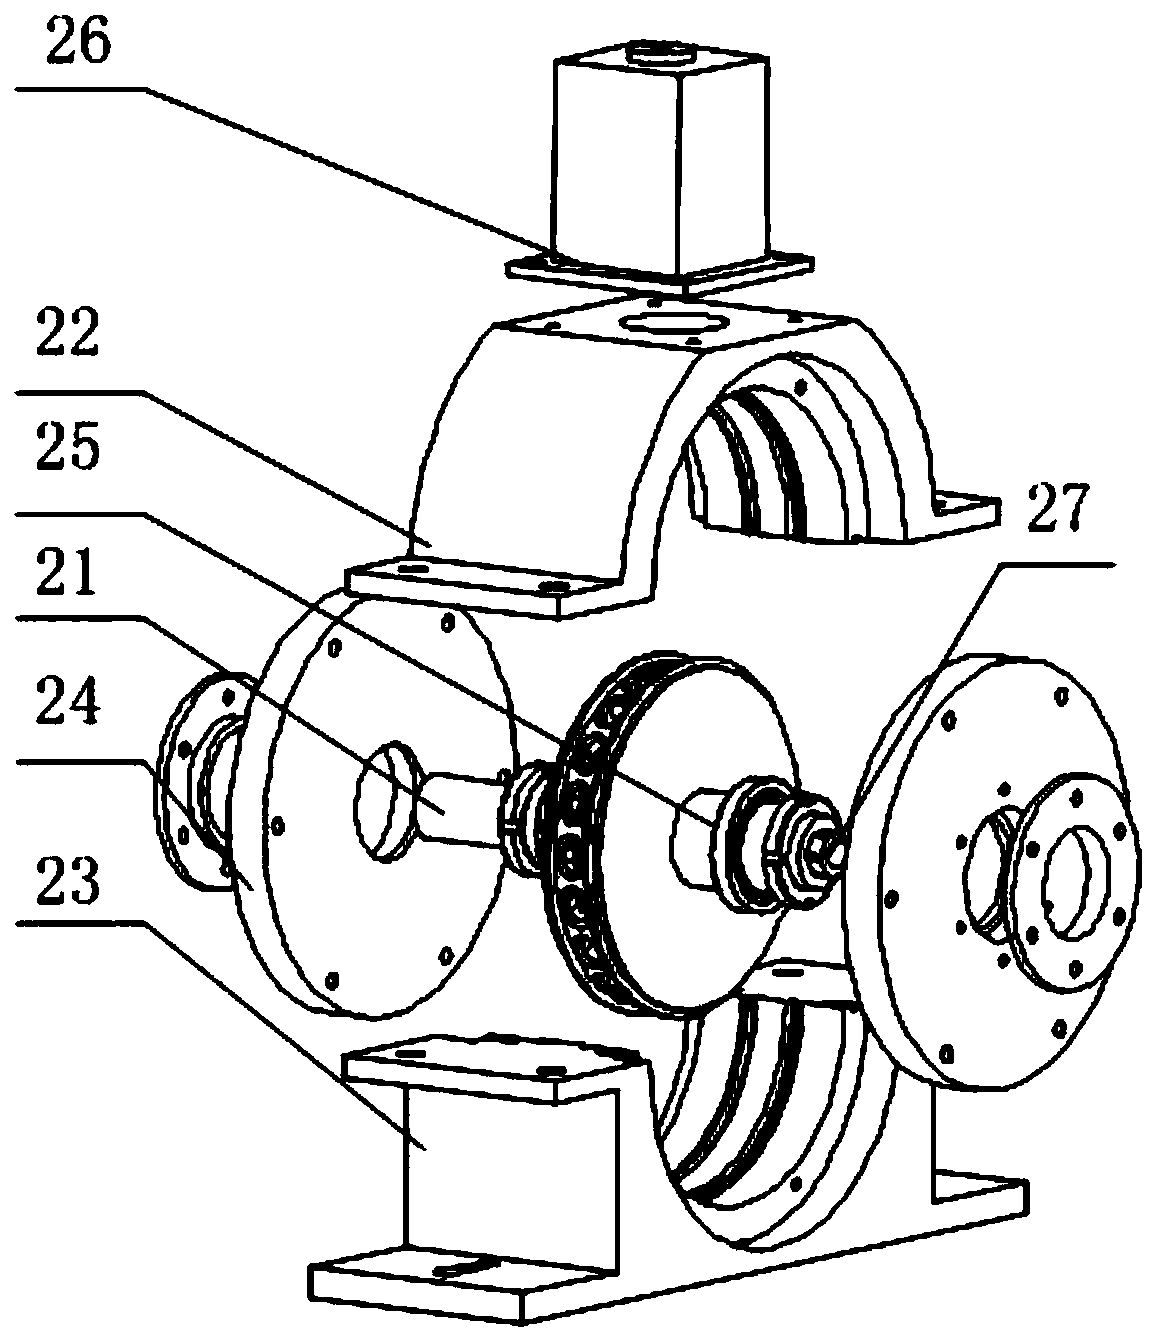 Airflow-thermo-mechanical coupling excitation test device